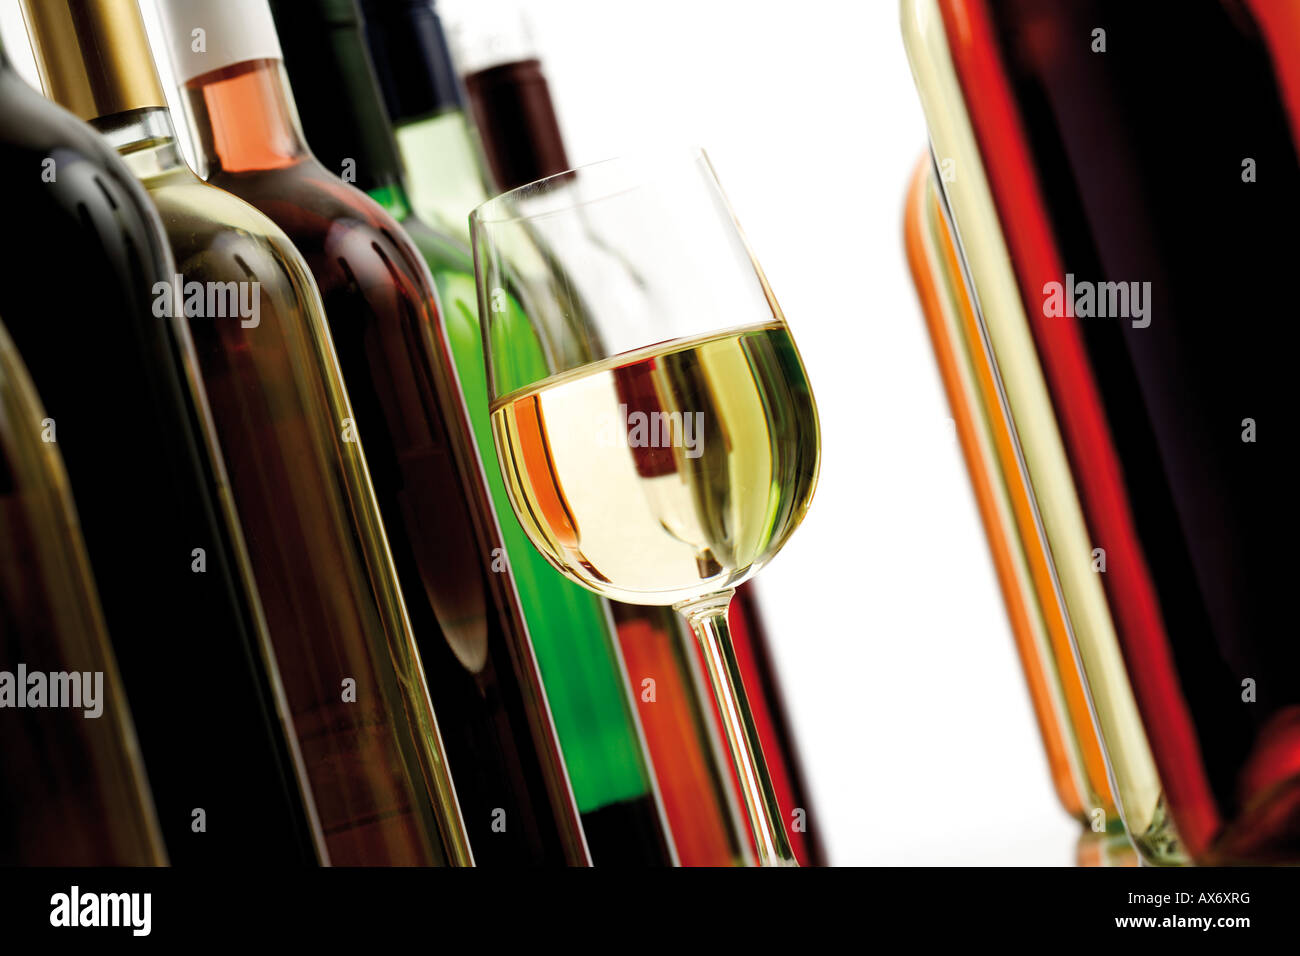 Glass of white wine between wine bottles, close-up Stock Photo